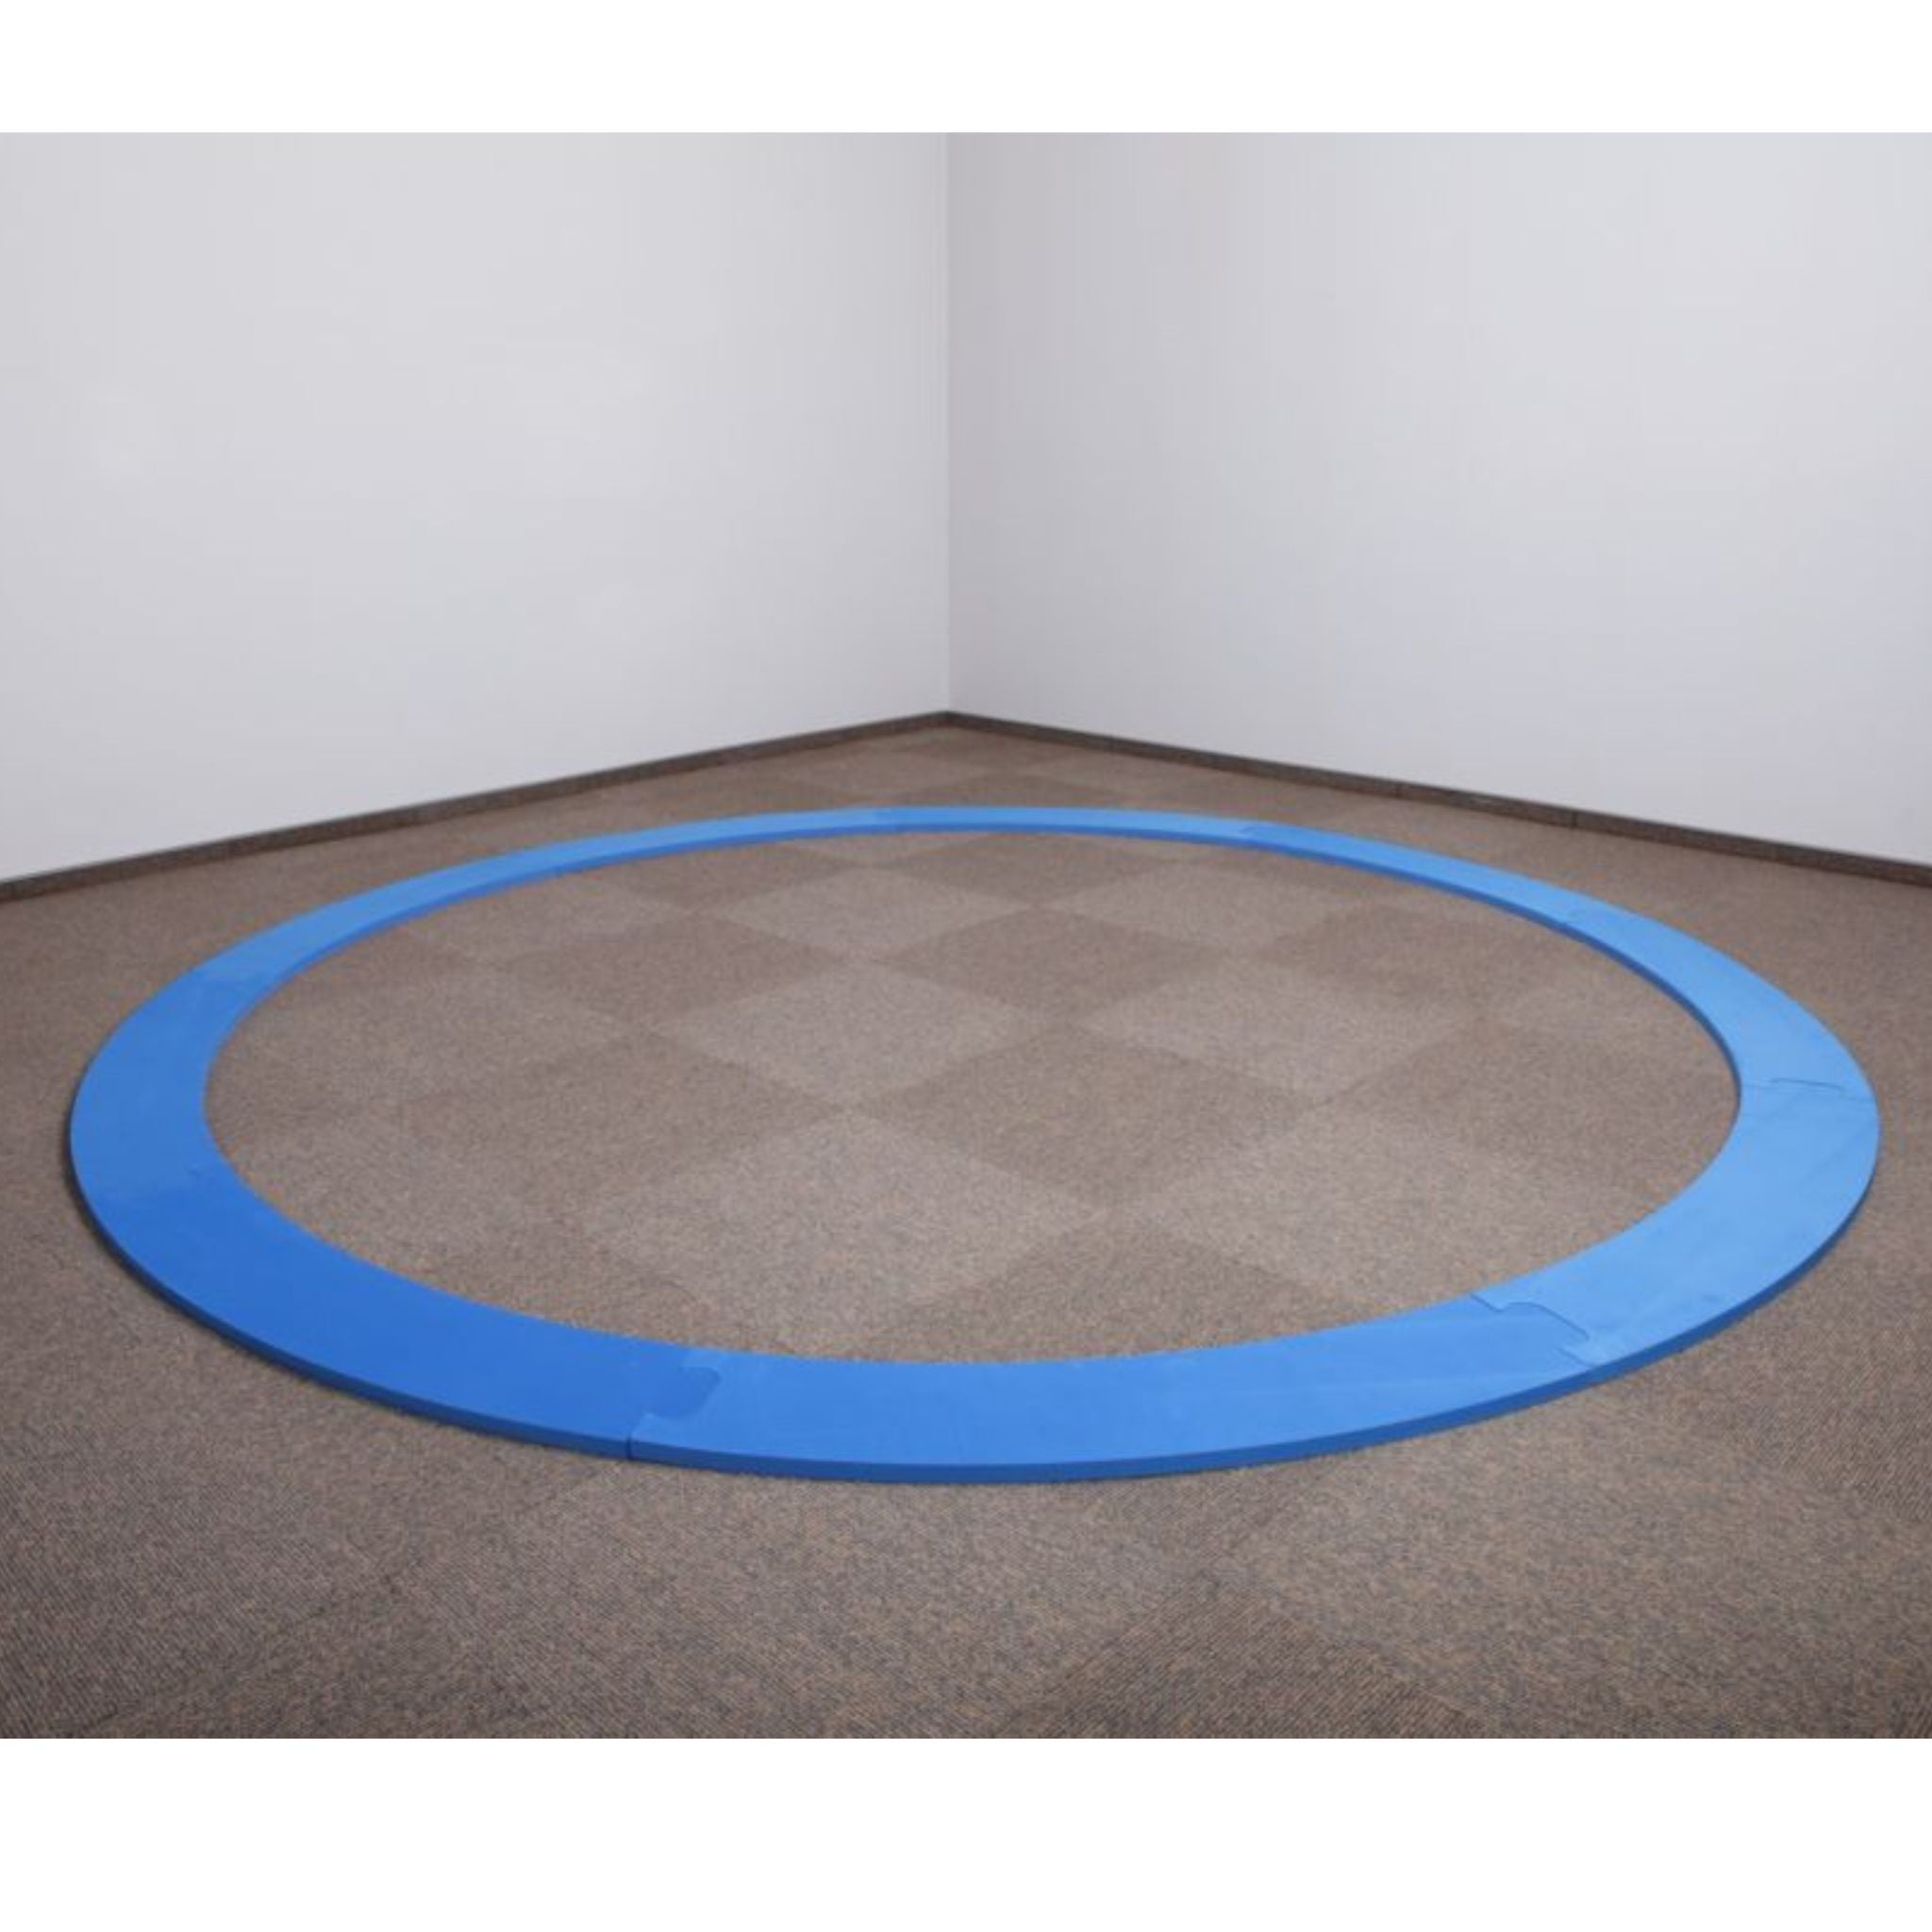 Polanik Foam Discus Training Circle set up on a carpeted gym floor